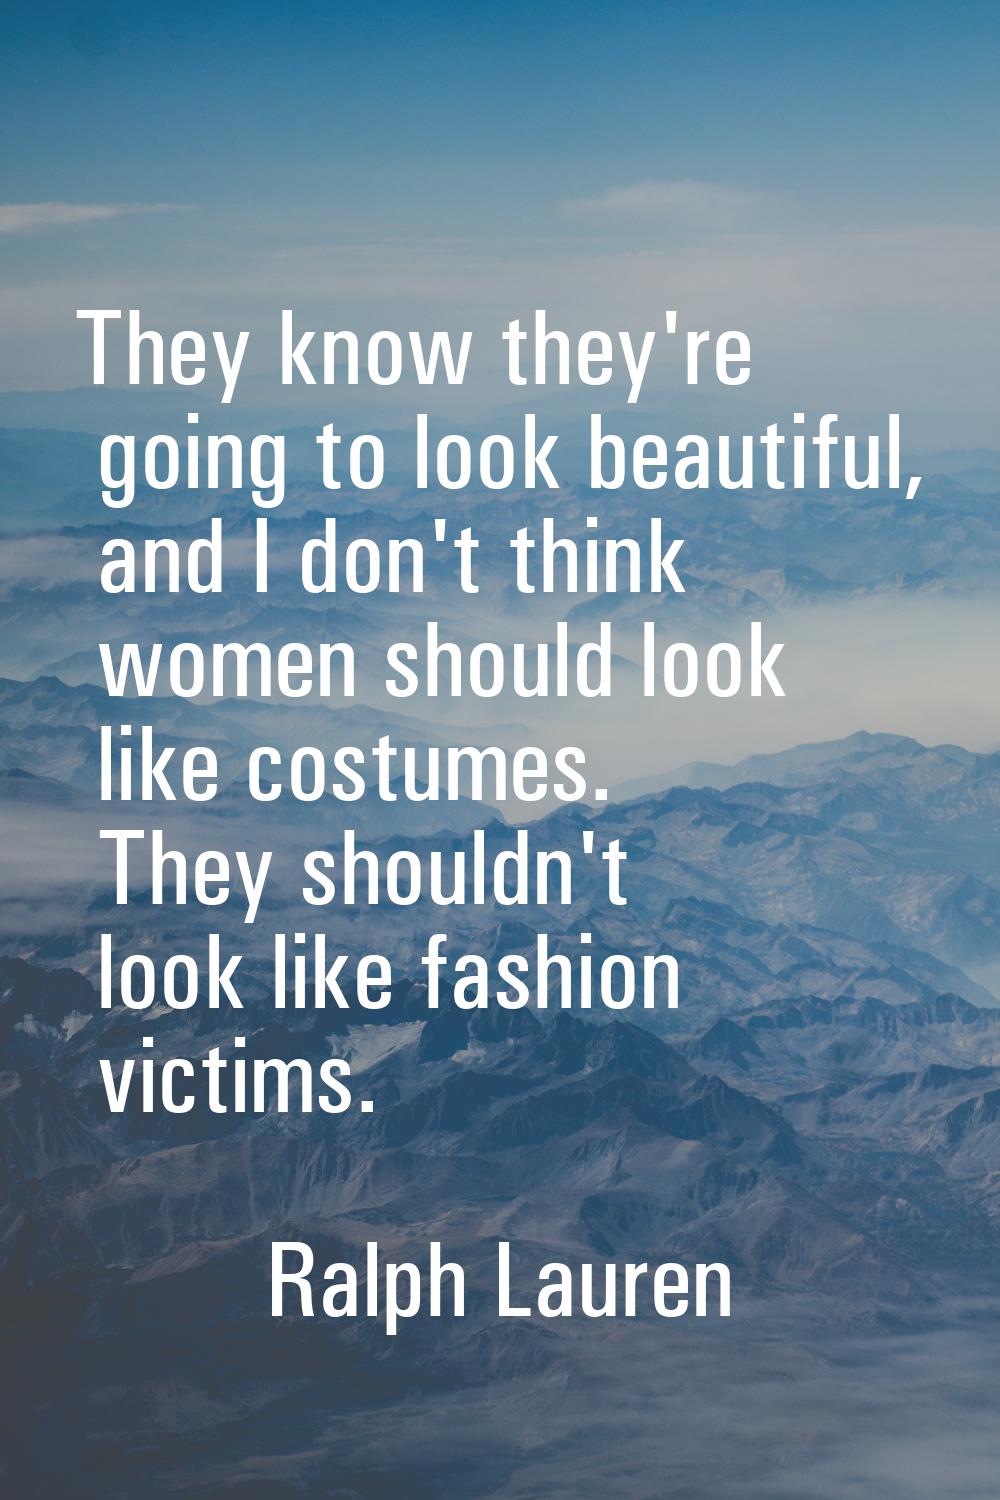 They know they're going to look beautiful, and I don't think women should look like costumes. They 